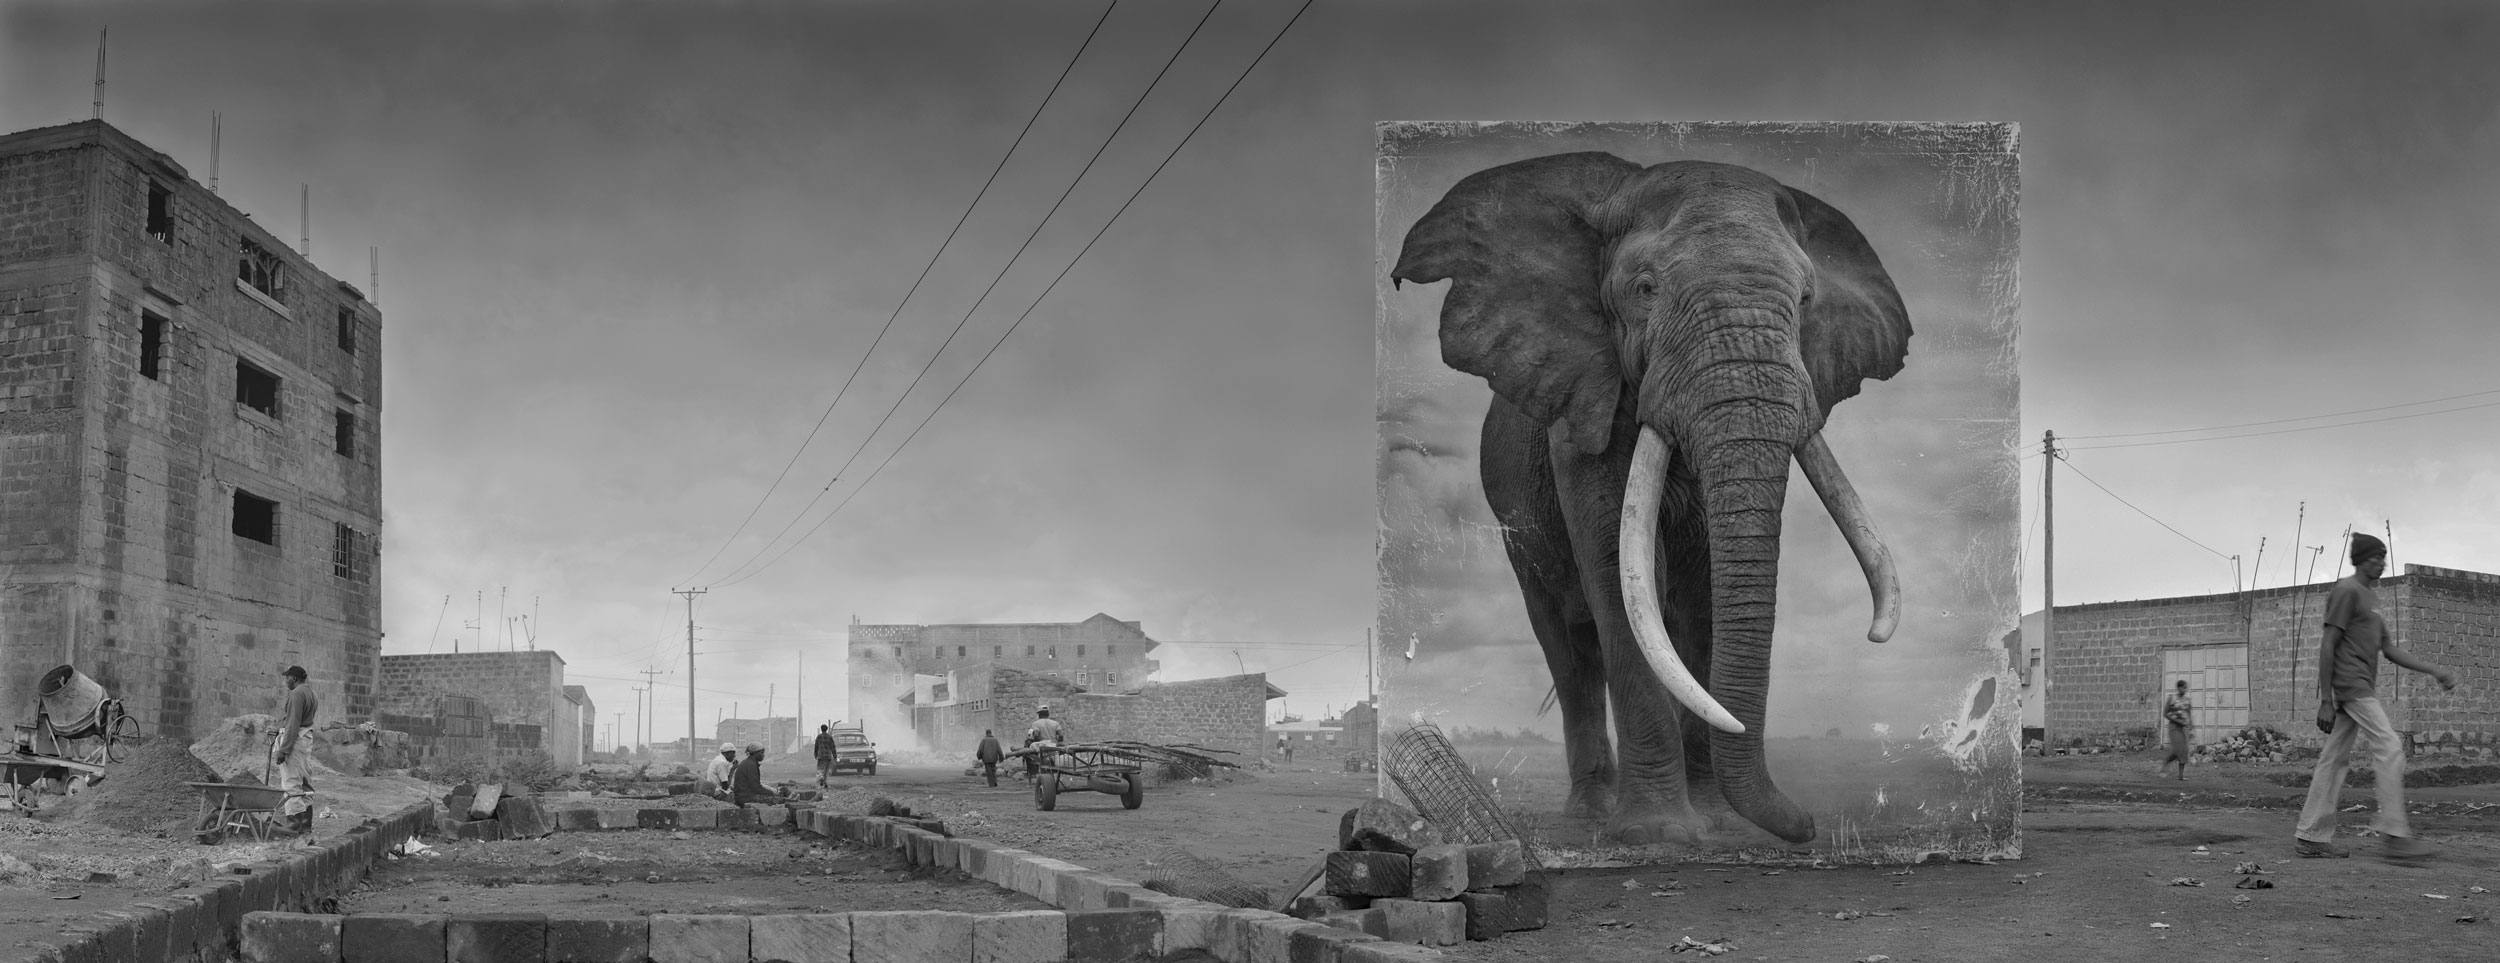 ROAD-WITH-ELEPHANT